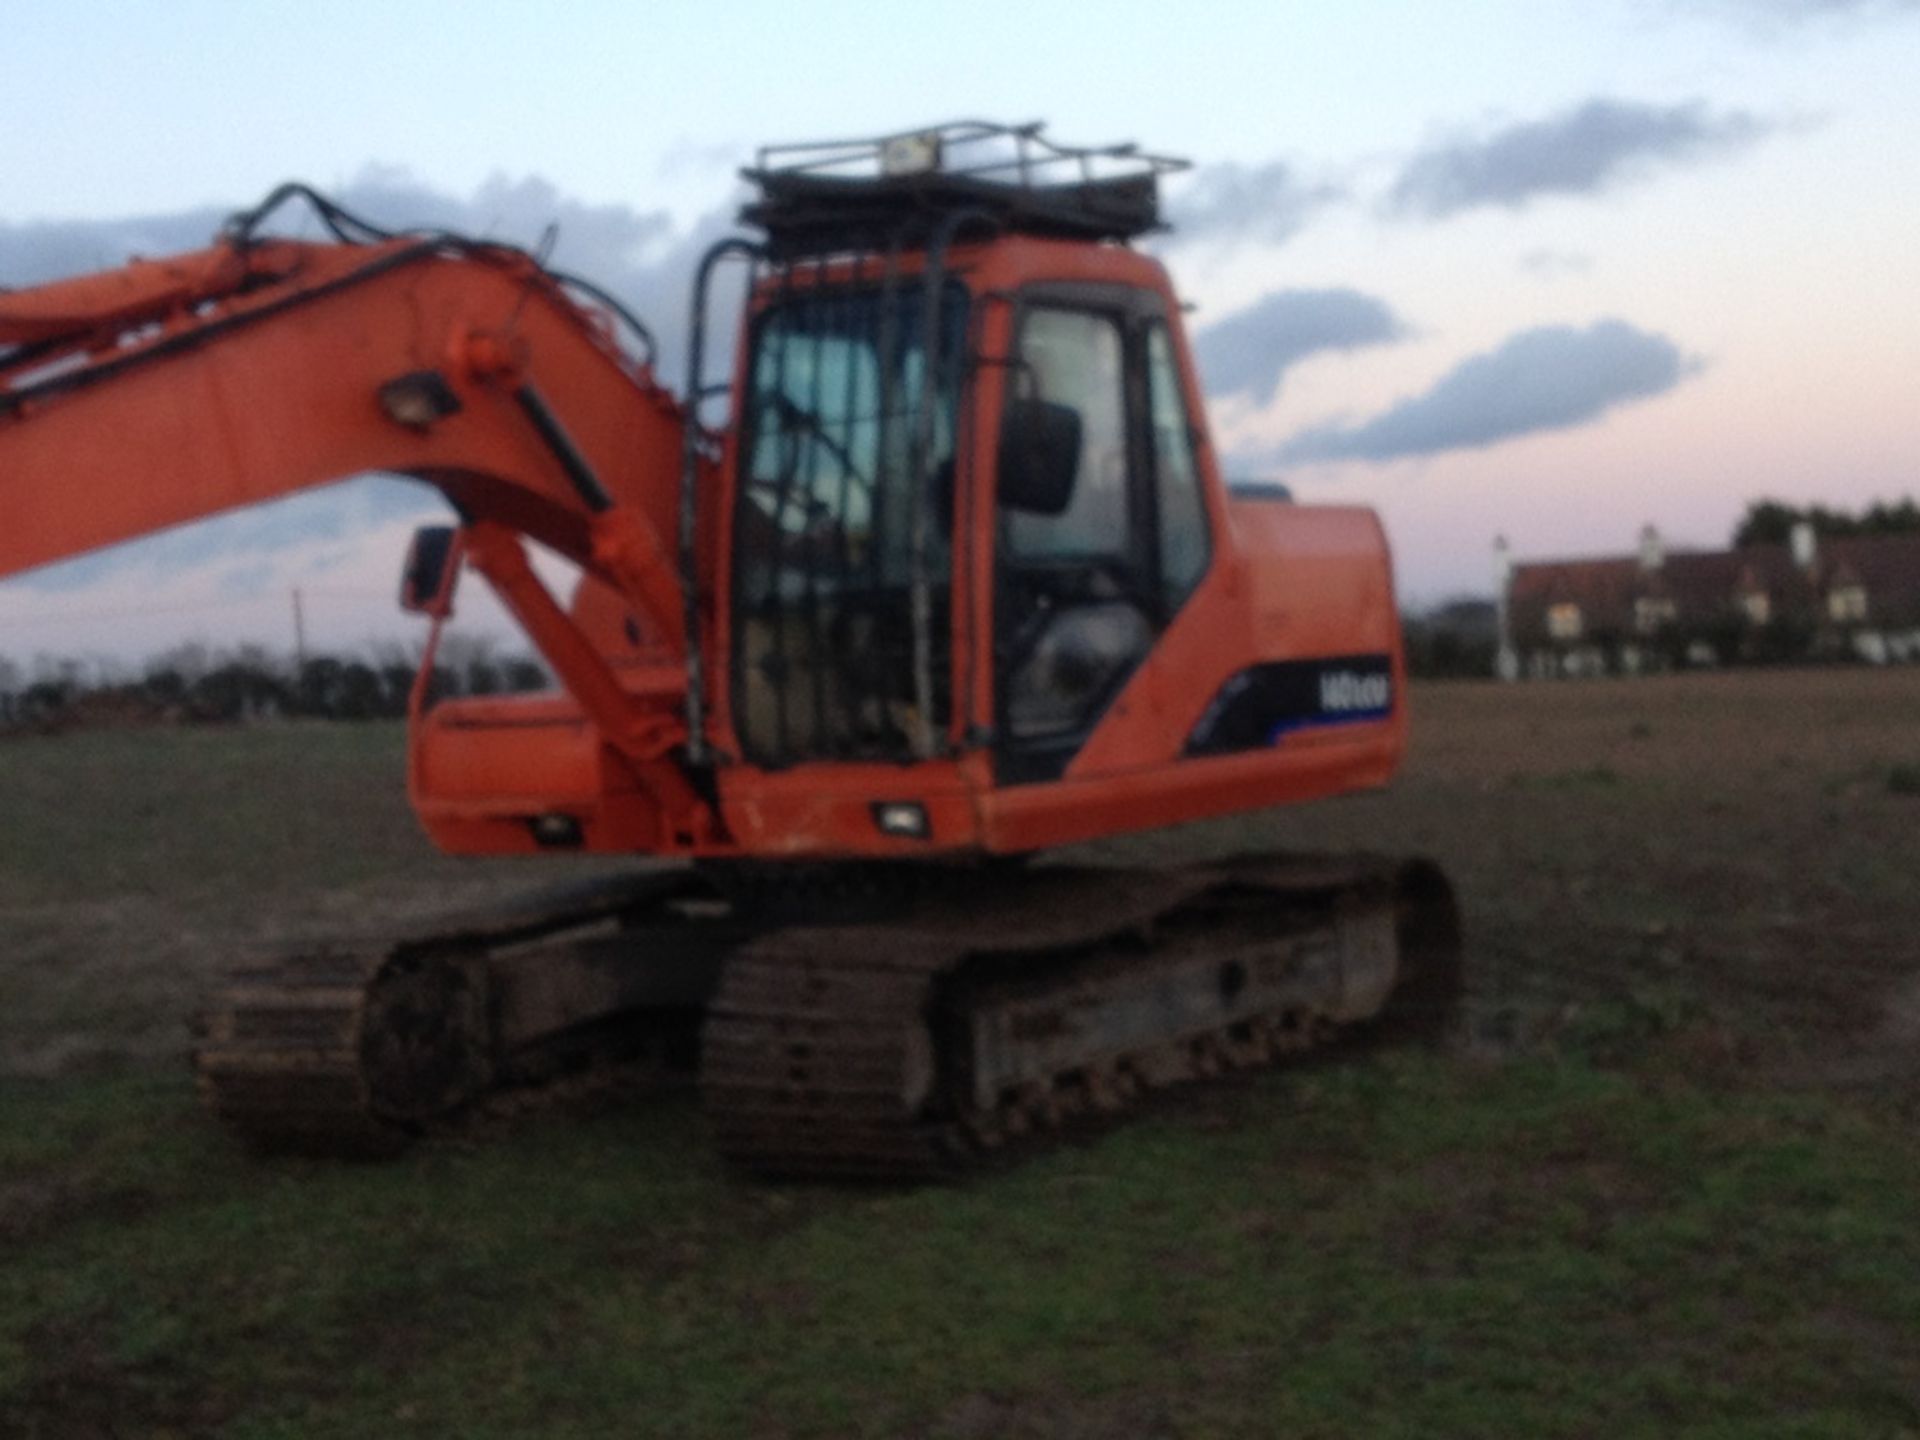 Doosan DX 140 tracked excavator, Year of Manufacture: 2005, Hours: 11,700 approximately, New